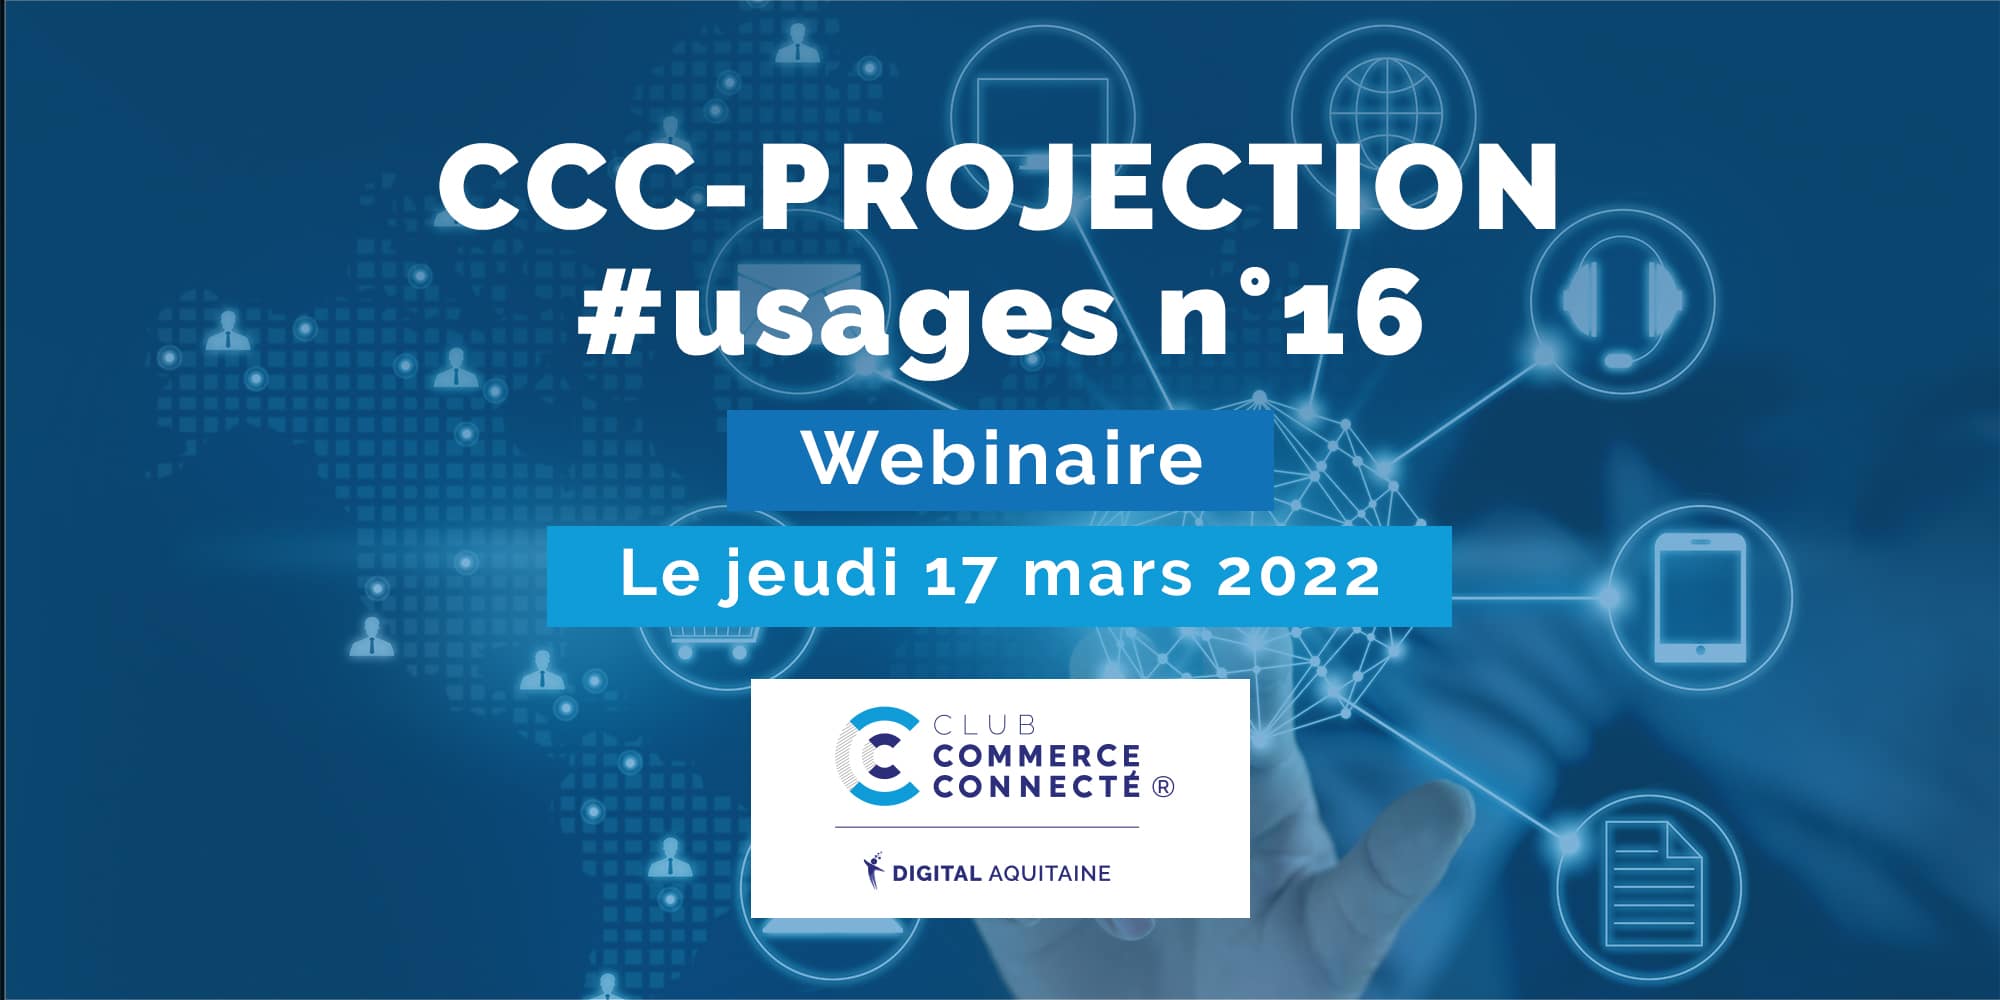 CCC-PROJECTION #usages n°16